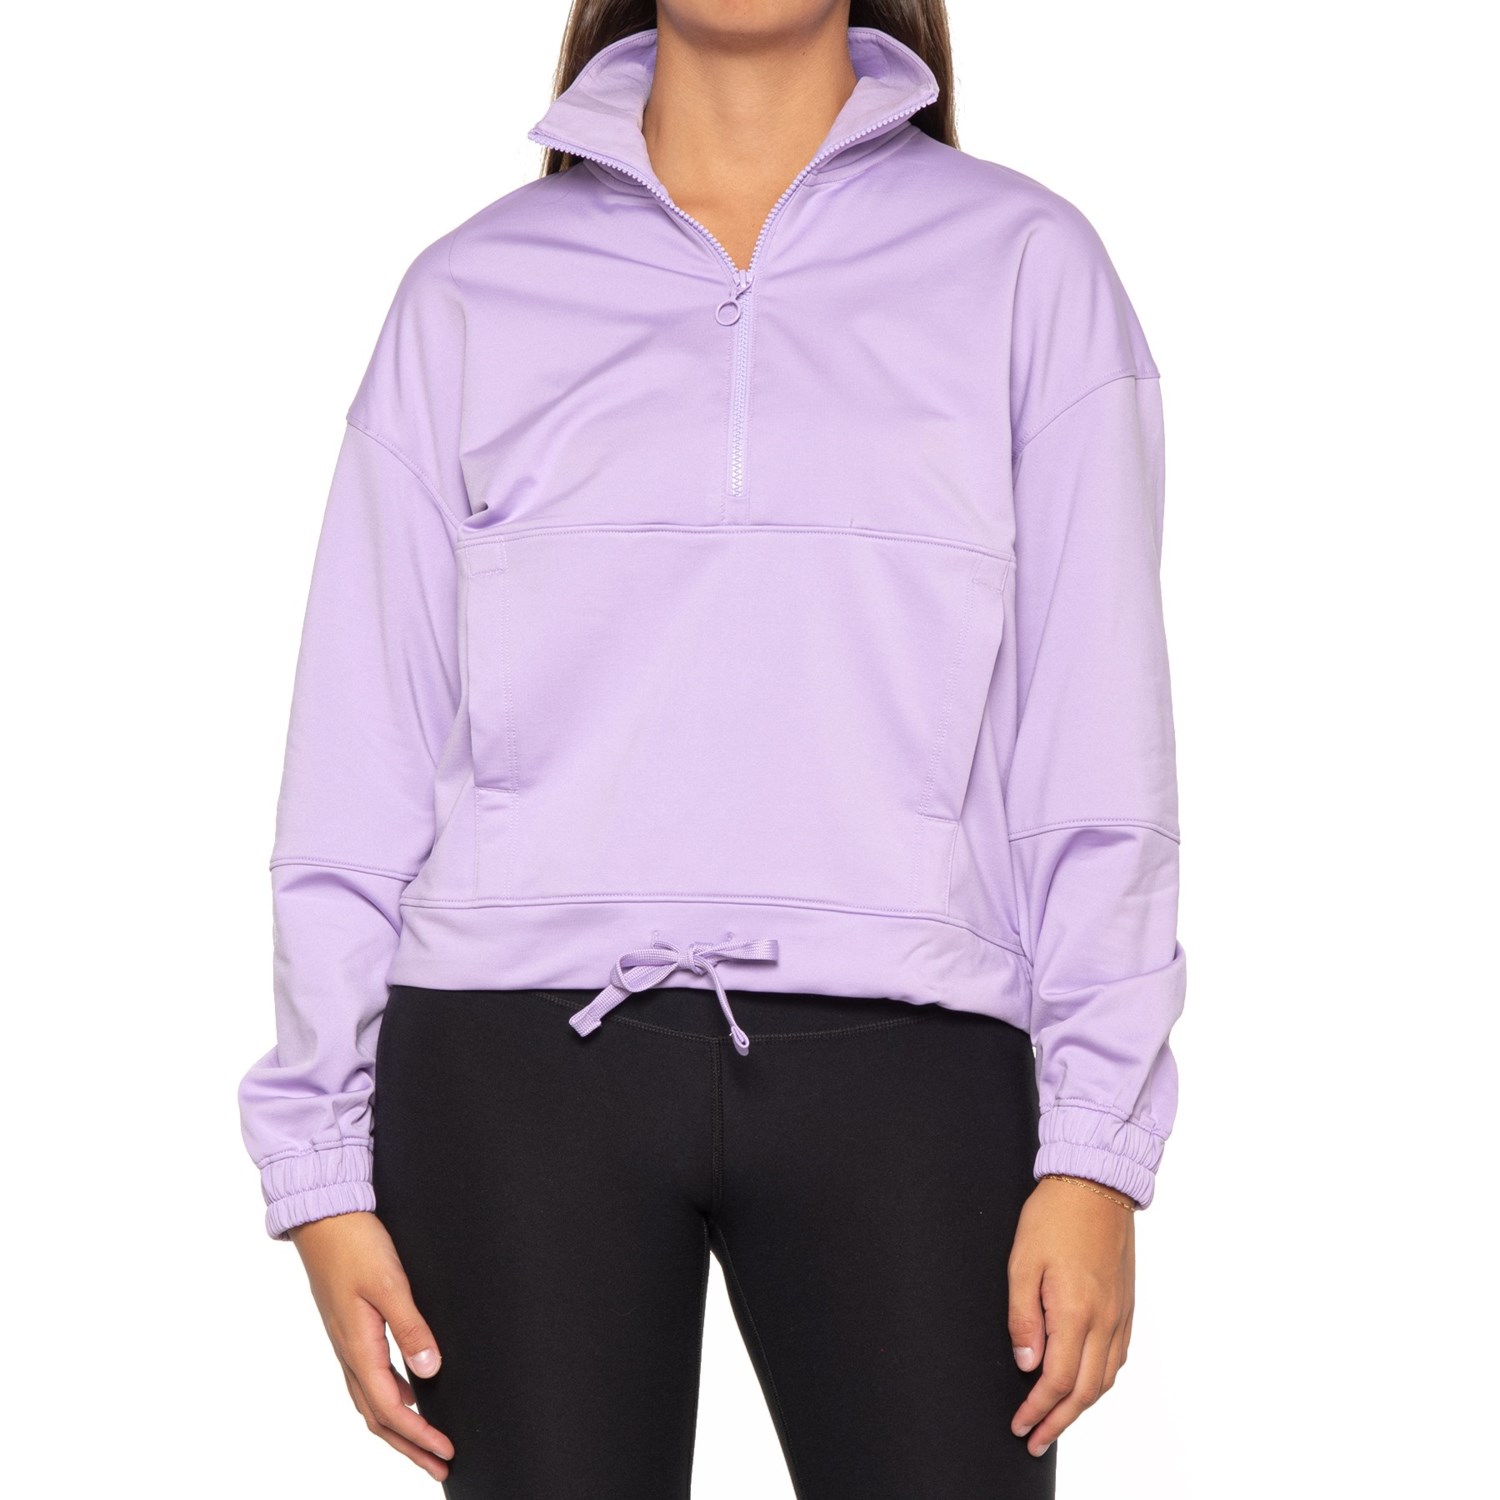 Mondetta Activewear Pink - $28 (20% Off Retail) New With Tags